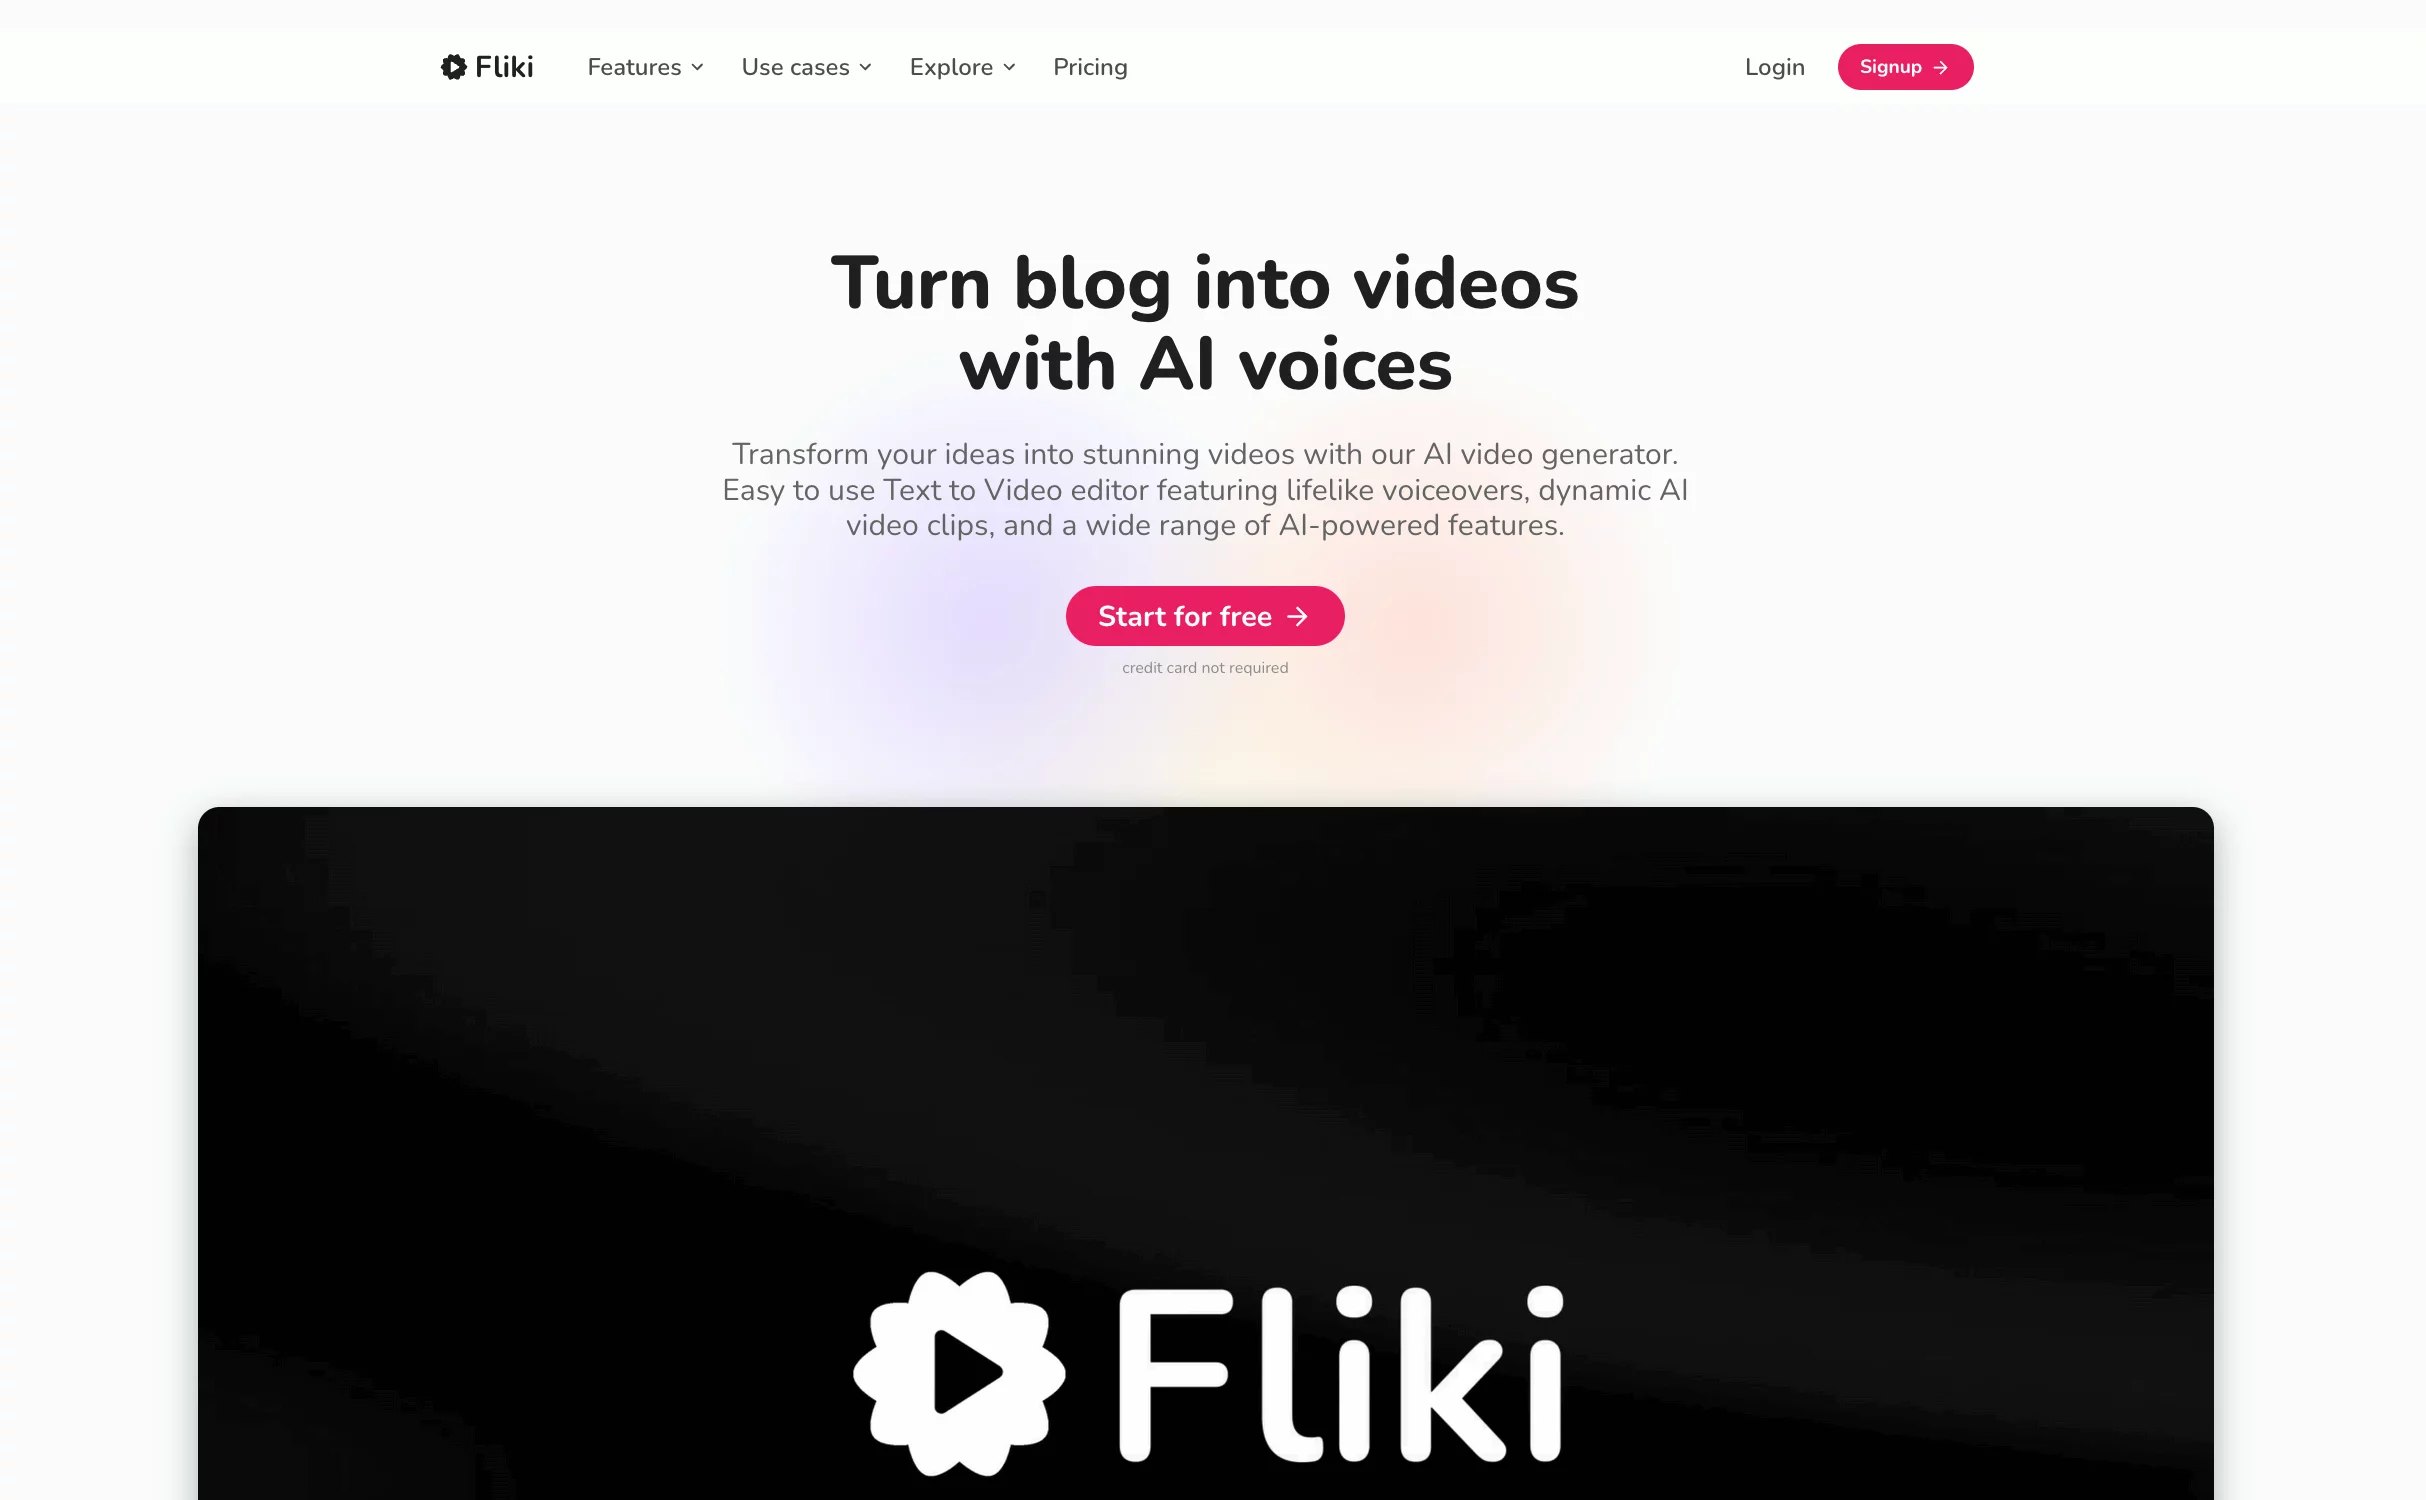 Fliki AI homepage, an AI video generator with features like text to Video editor